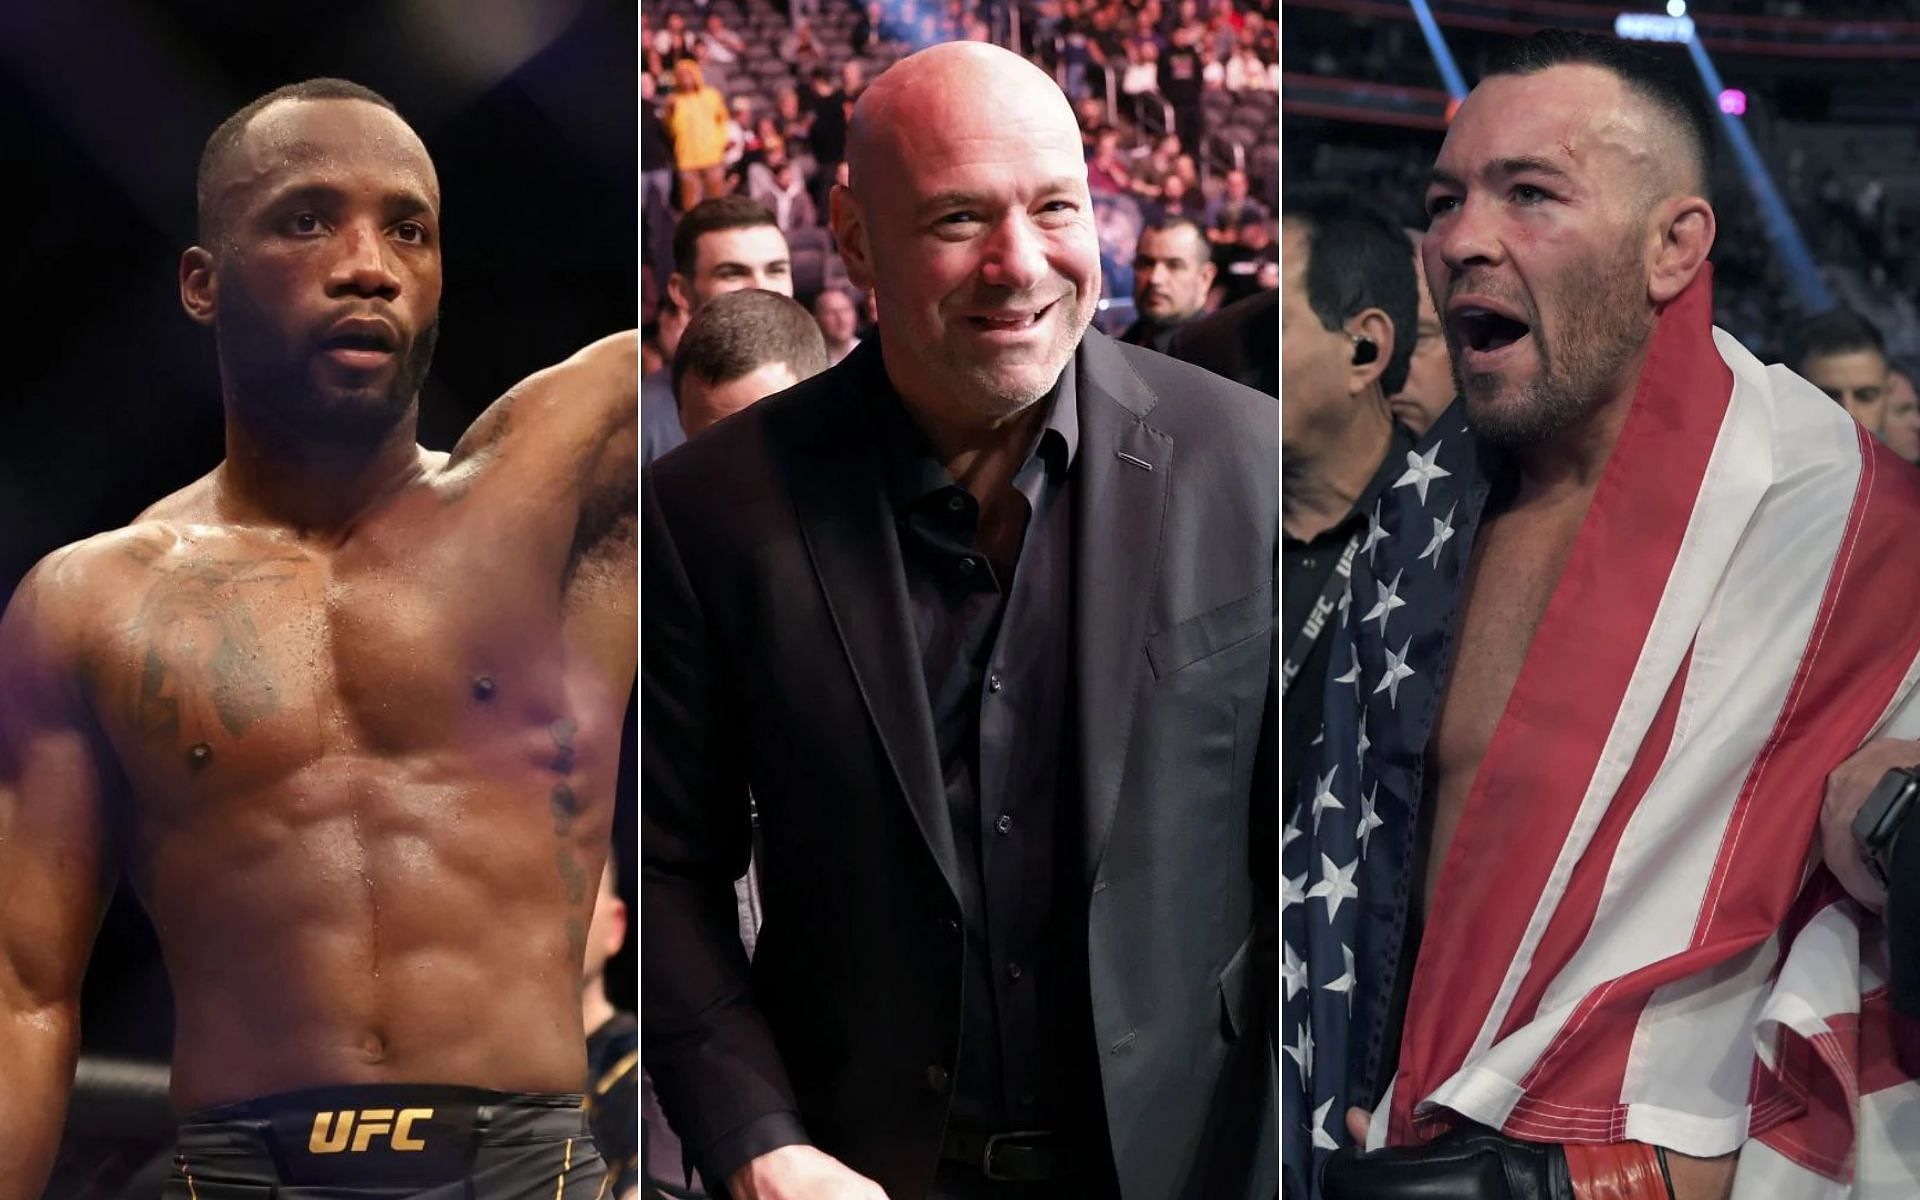 Leon Edwards [Left], Dana White [Middle], and Colby Covington [Right]